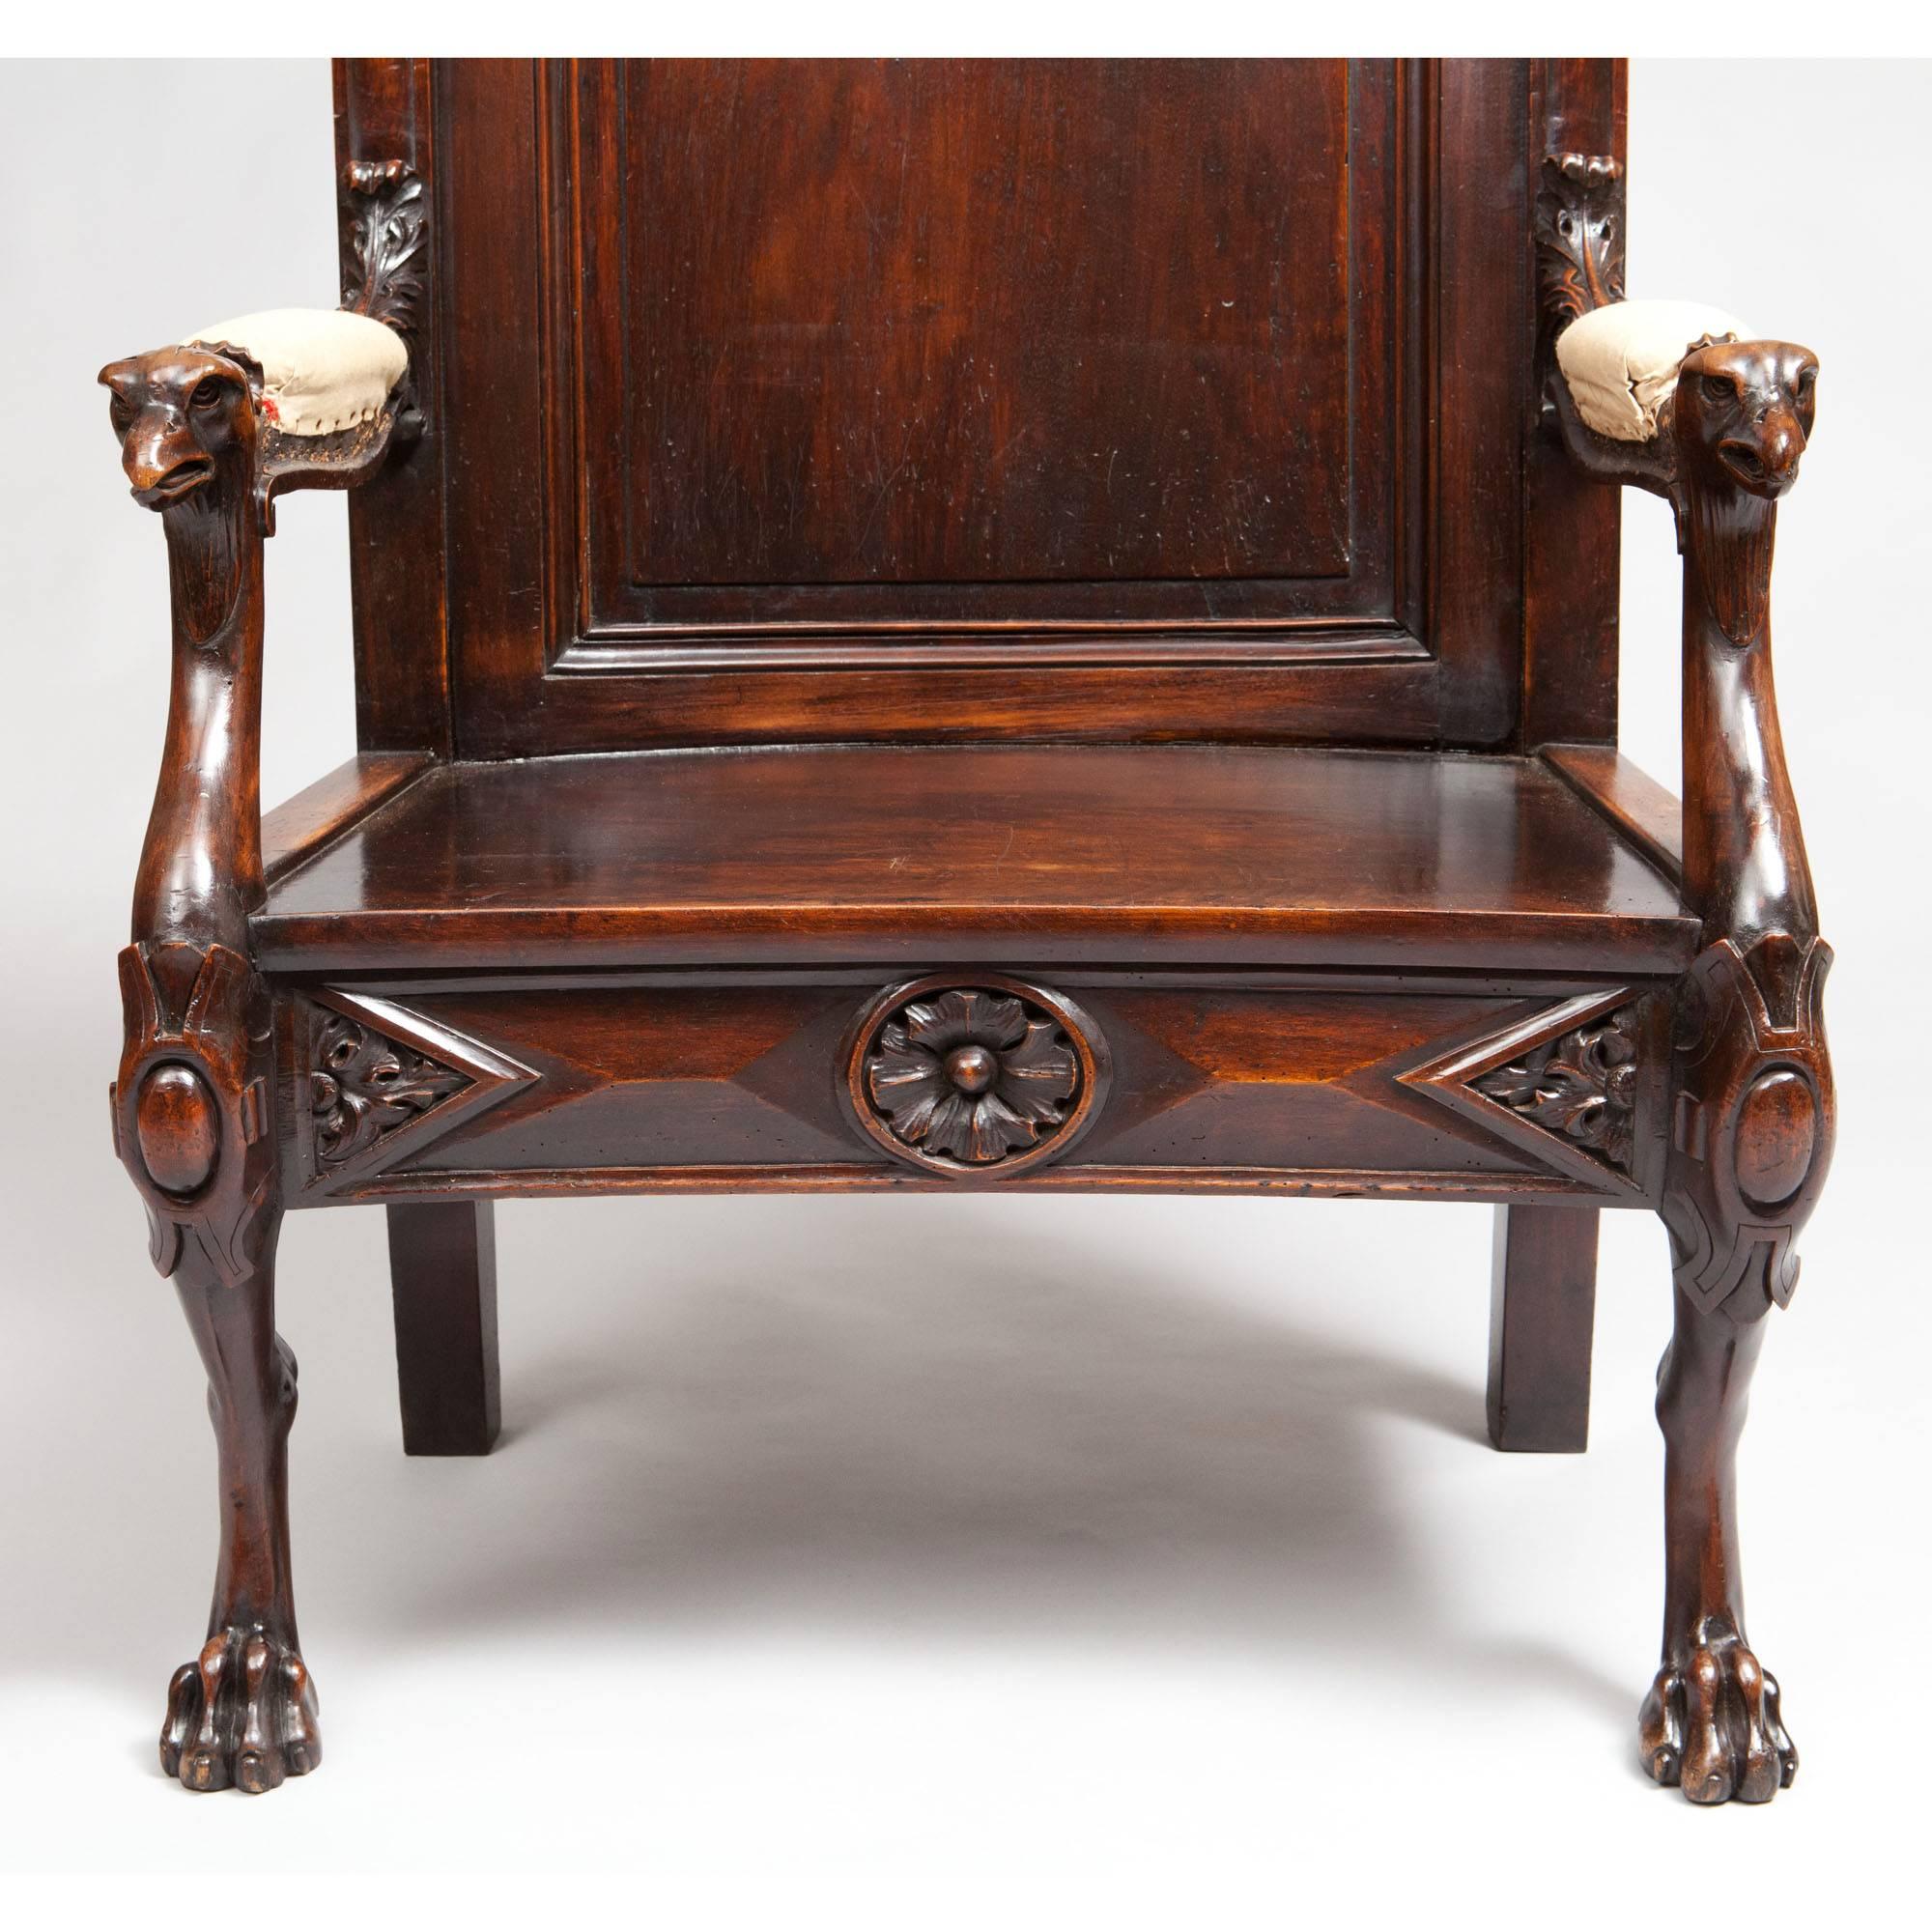 19th Century Walnut Throne Chair In Excellent Condition For Sale In London, by appointment only